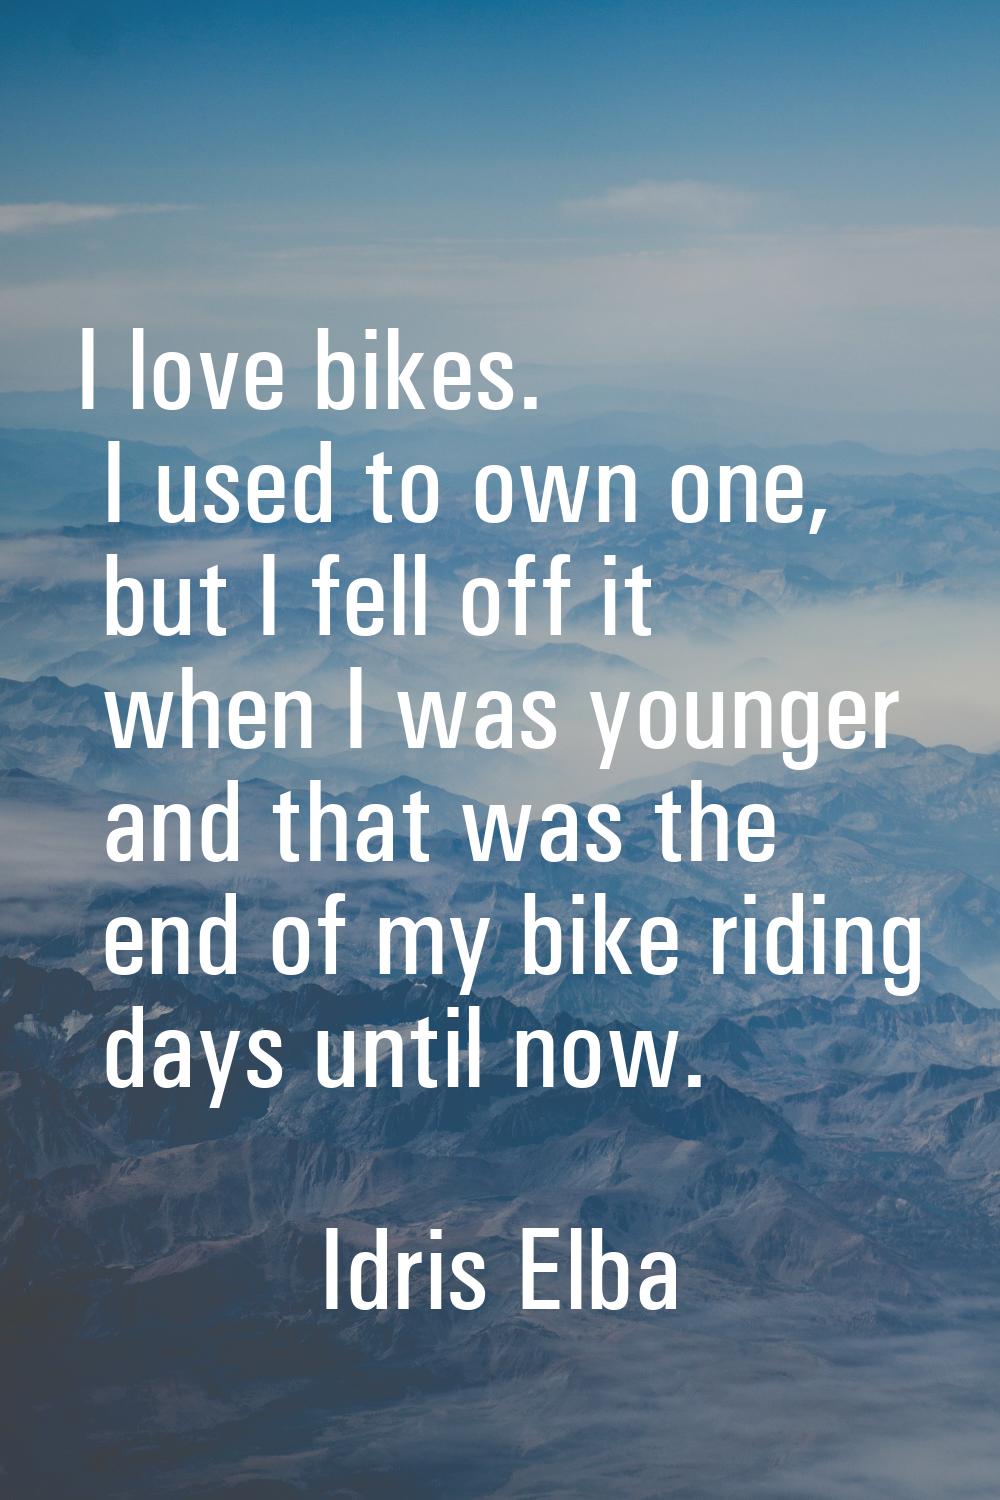 I love bikes. I used to own one, but I fell off it when I was younger and that was the end of my bi